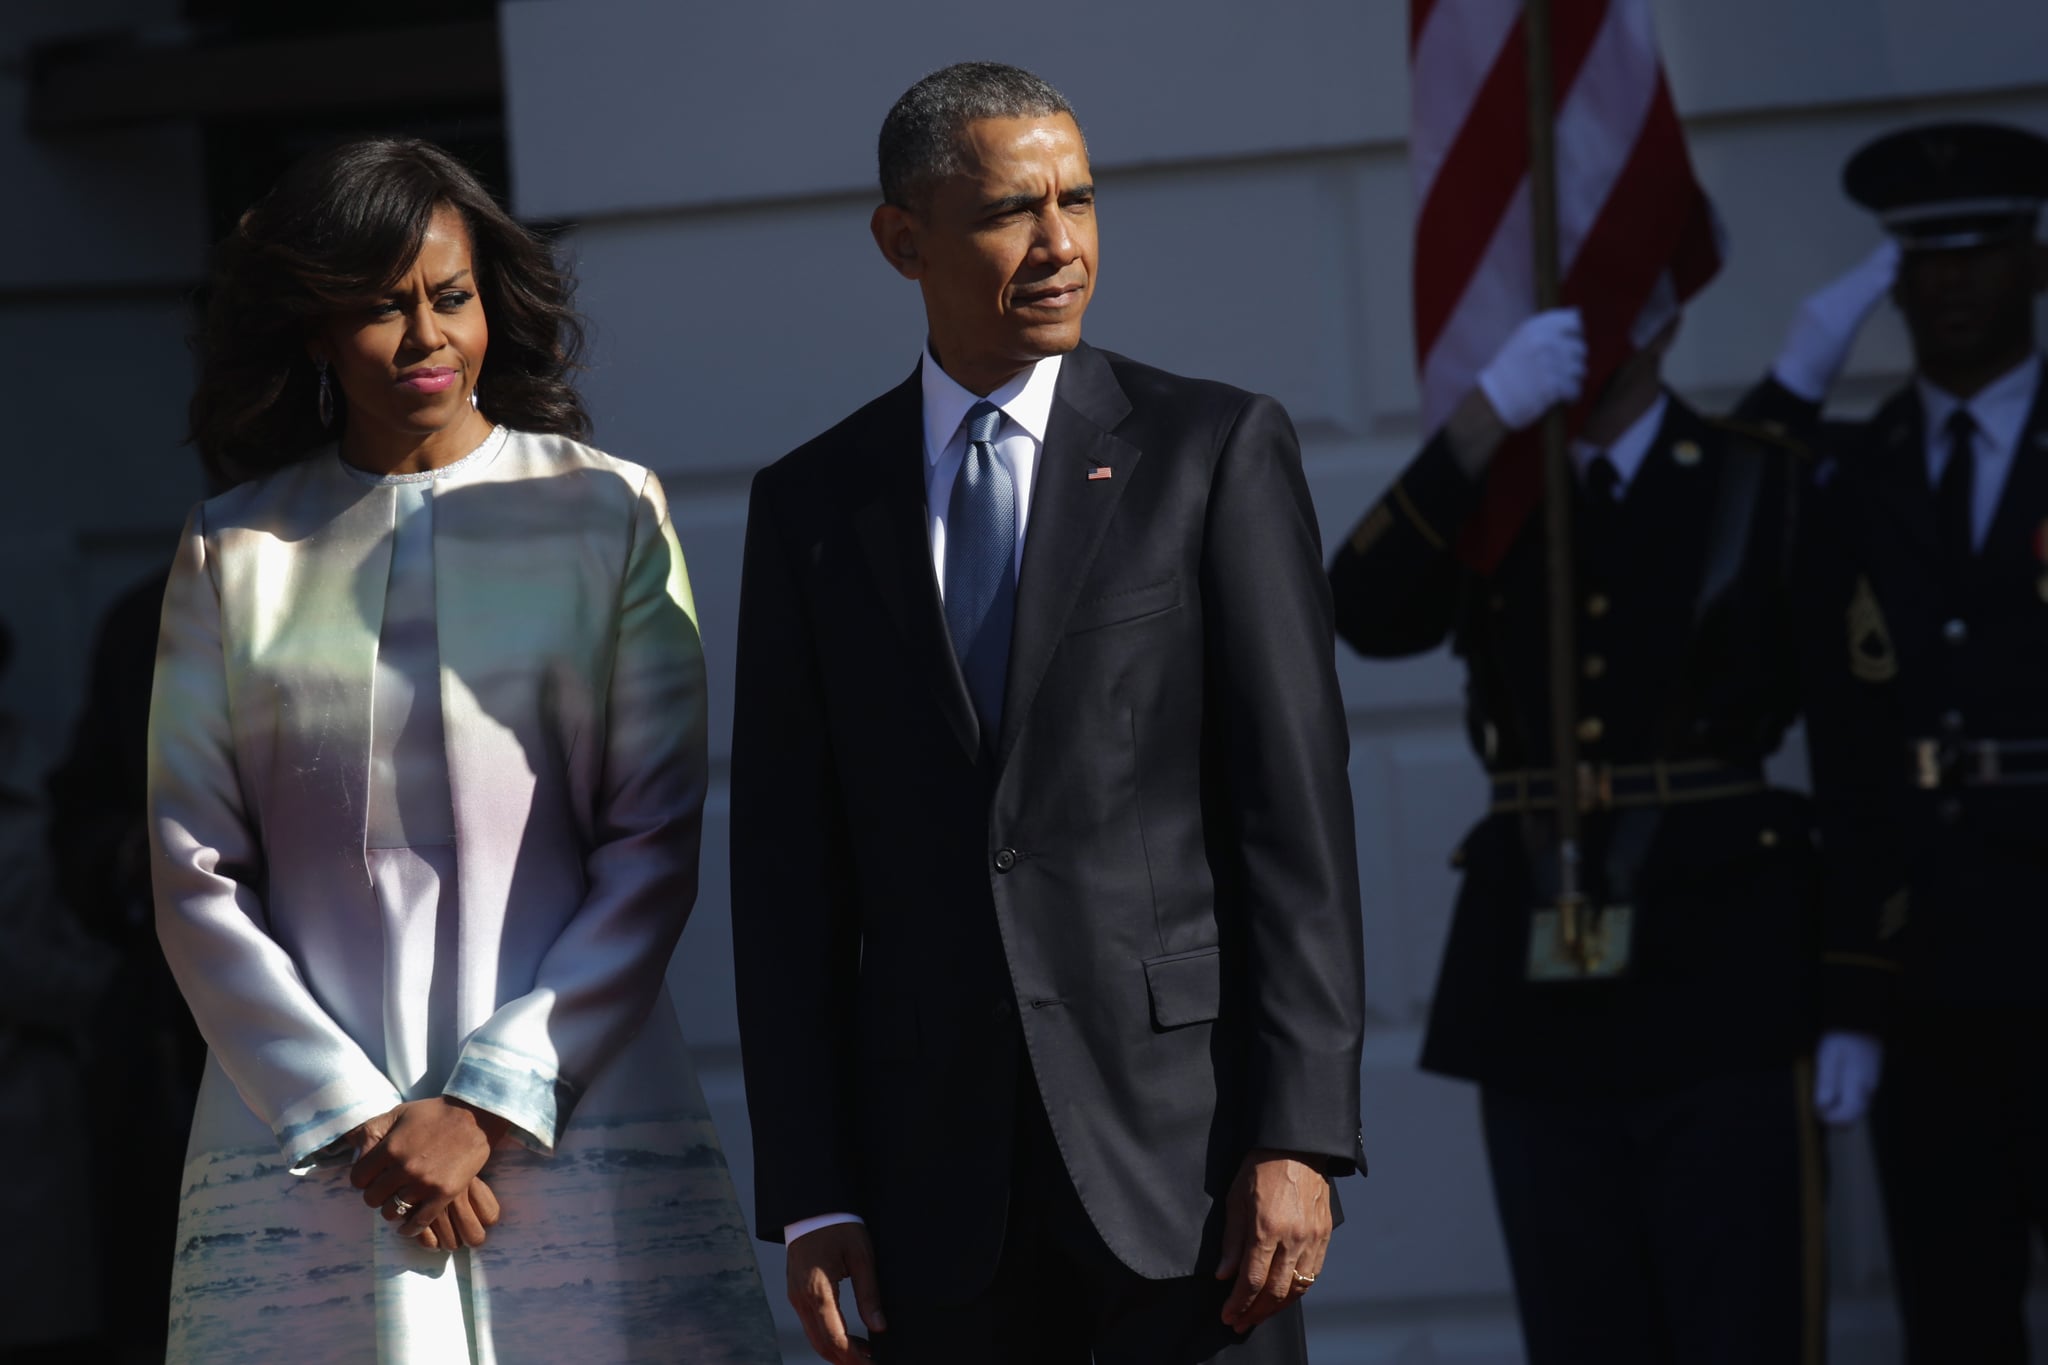 WASHINGTON, DC - APRIL 28:  (AFP OUT) U.S. President Barack Obama (R) and first lady Michelle Obama (L) wait for the arrival of Japanese Prime Minister Shinzo Abe and his wife Akie Abe during an official arrival ceremony at the South Lawn of the White House April 28, 2015 in Washington, DC. The Japanese Prime Minister and his wife are on an official visit to Washington.  (Photo by Alex Wong/Getty Images)